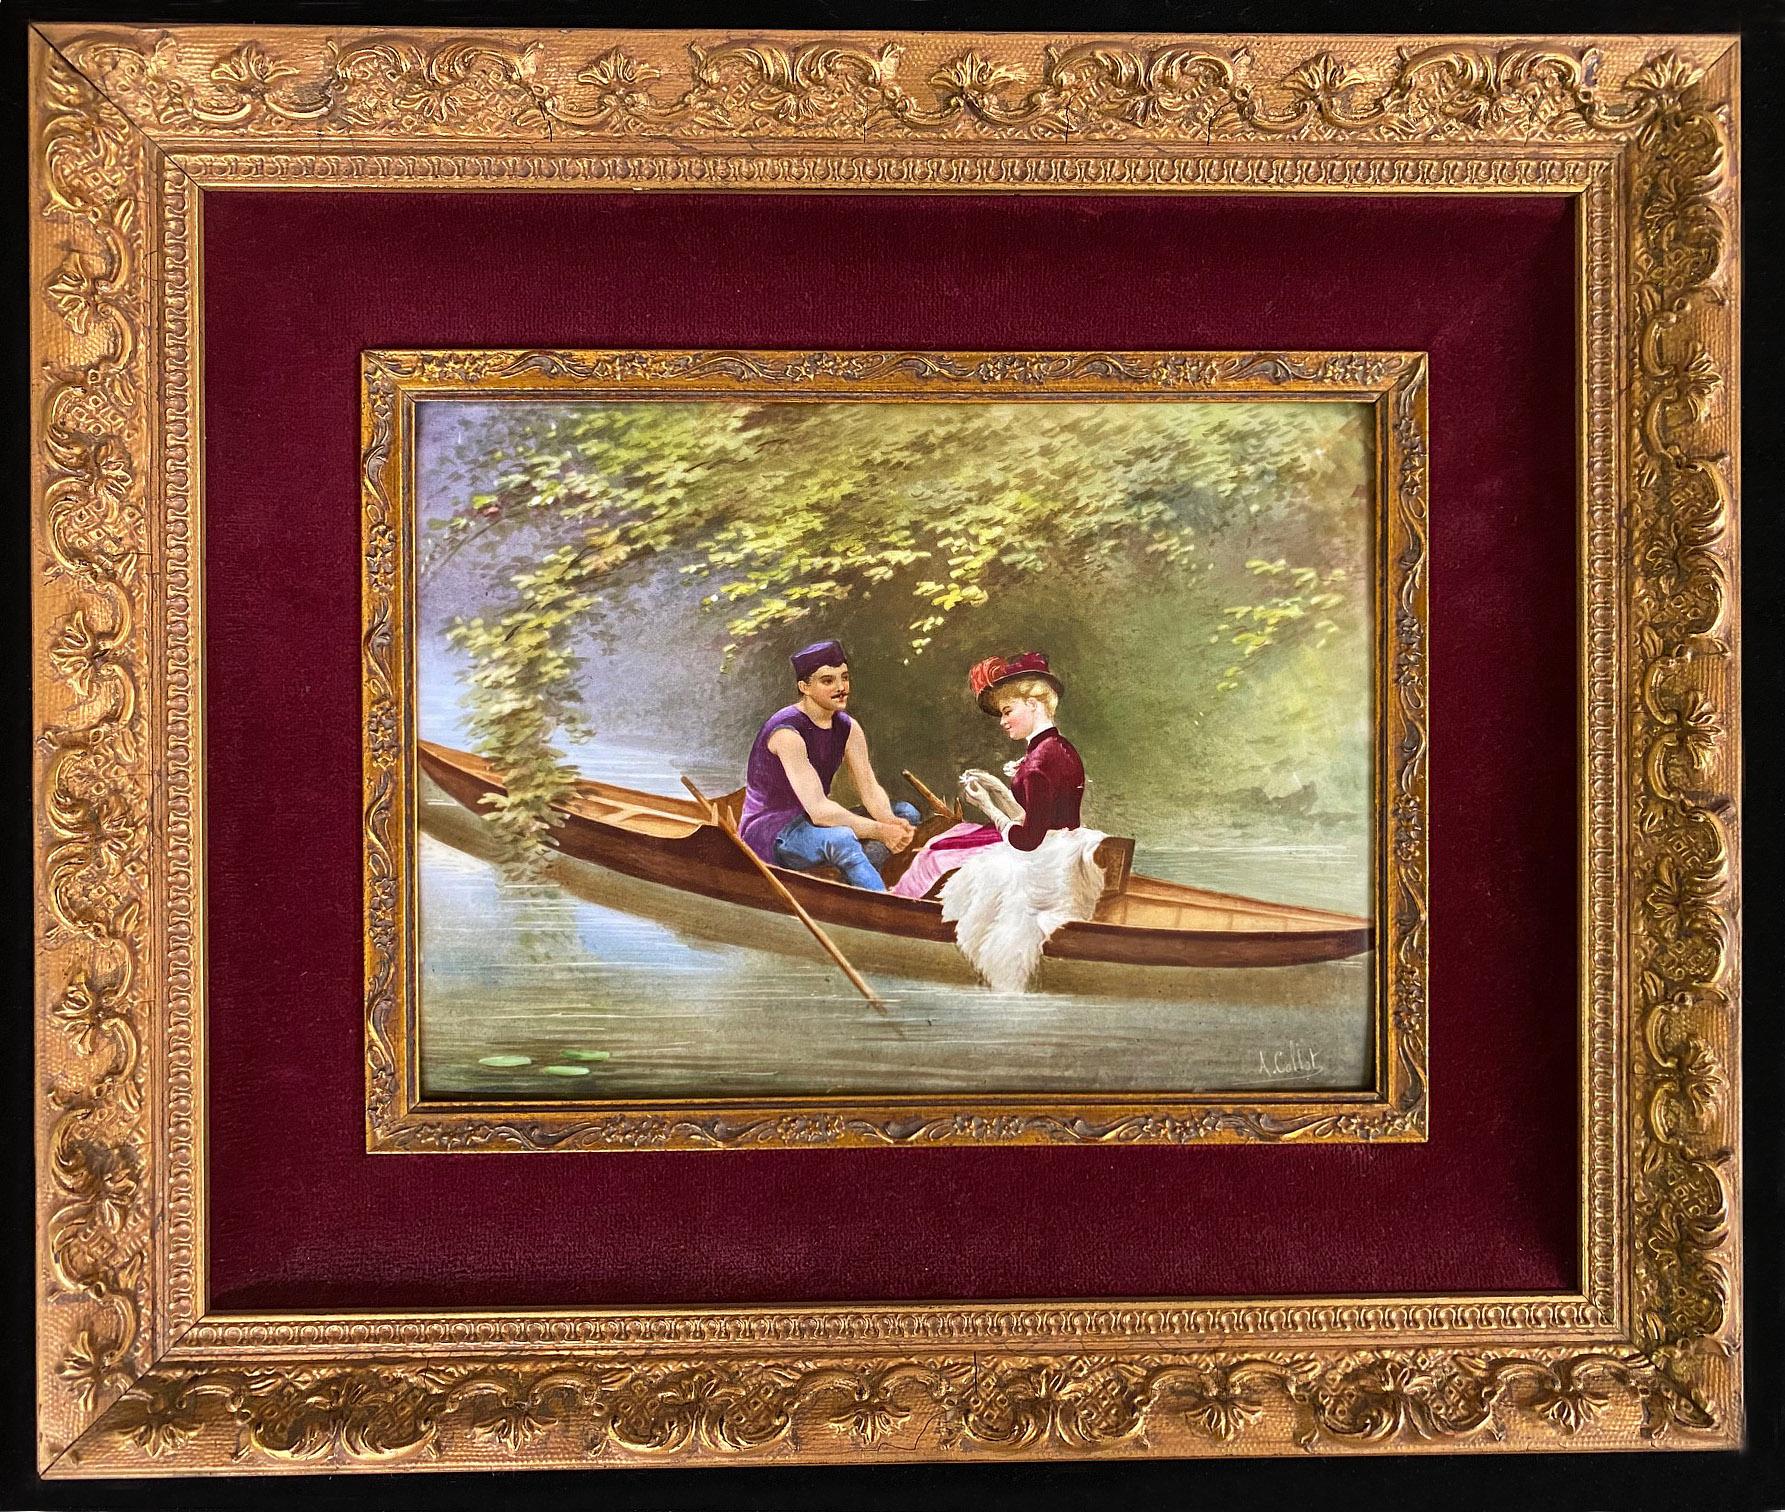 A stunning late 19th century sèvres style porcelain rectangular plaque.

A landscape scene depicting two lovers in a boat surrounded by water and trees, in a giltwood and red felt frame.

Signed A. Collot.

In late 1739 – early 1740 the Sèvres